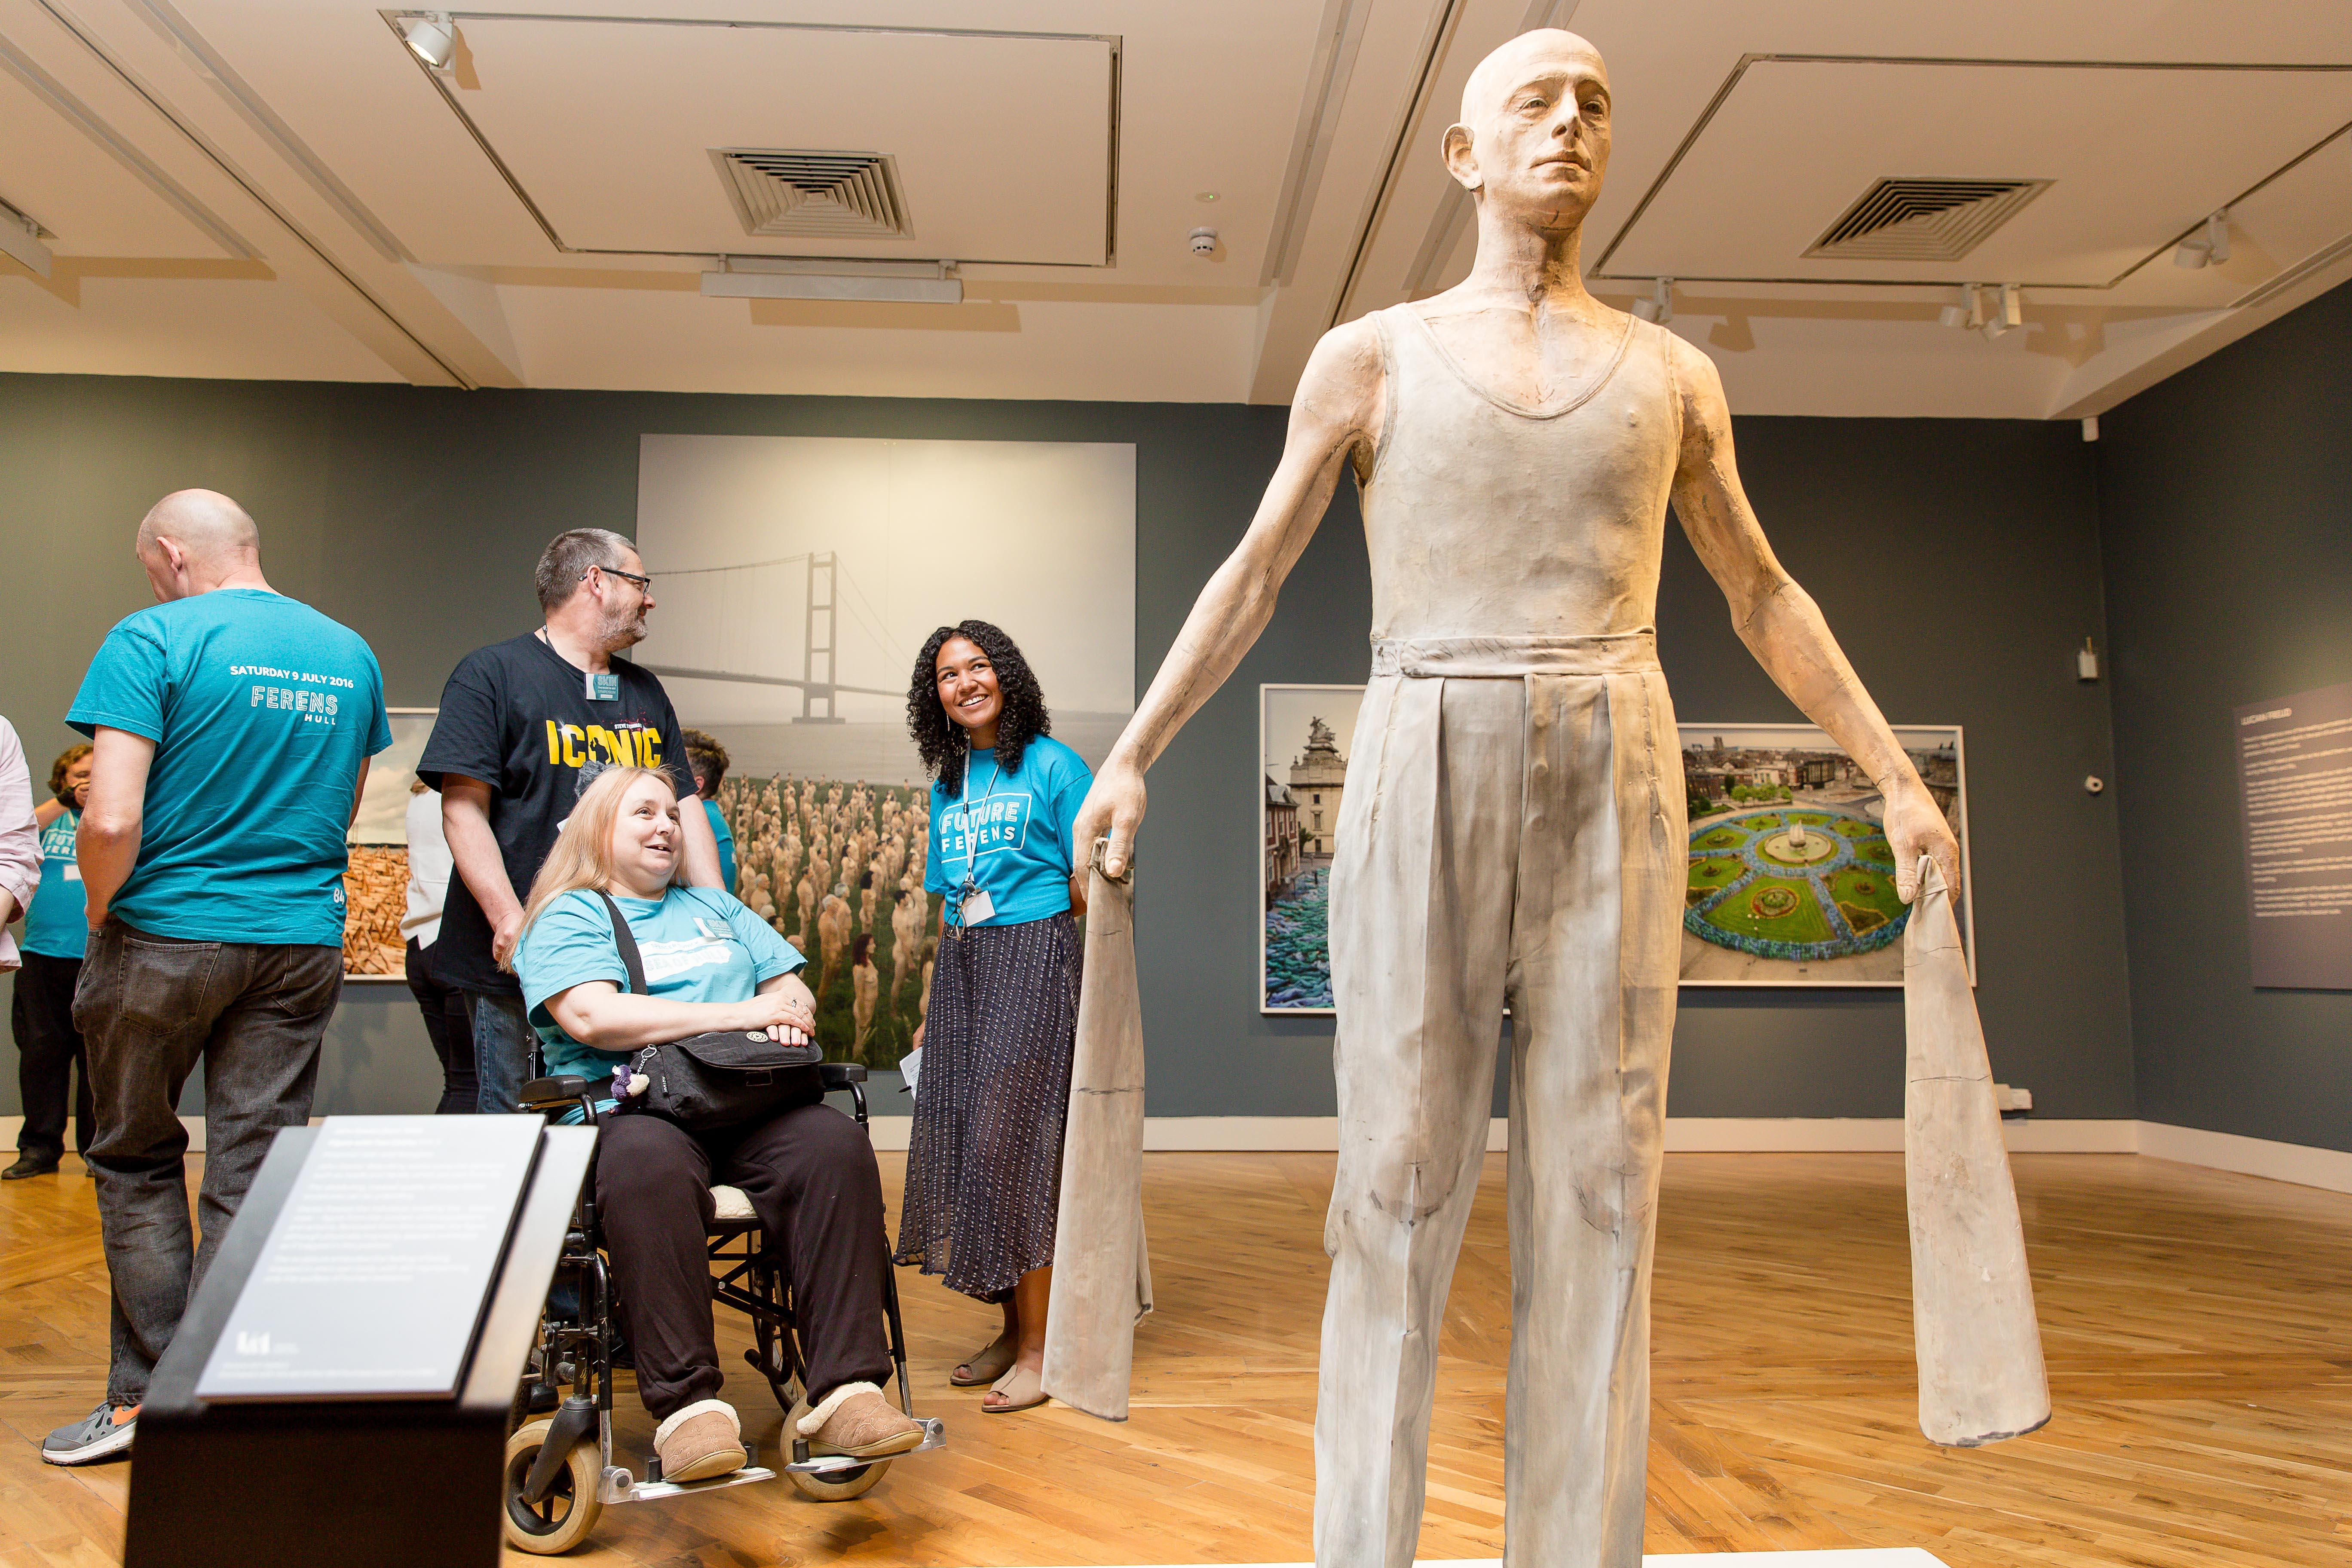 Four people looking at a sculpture of a man